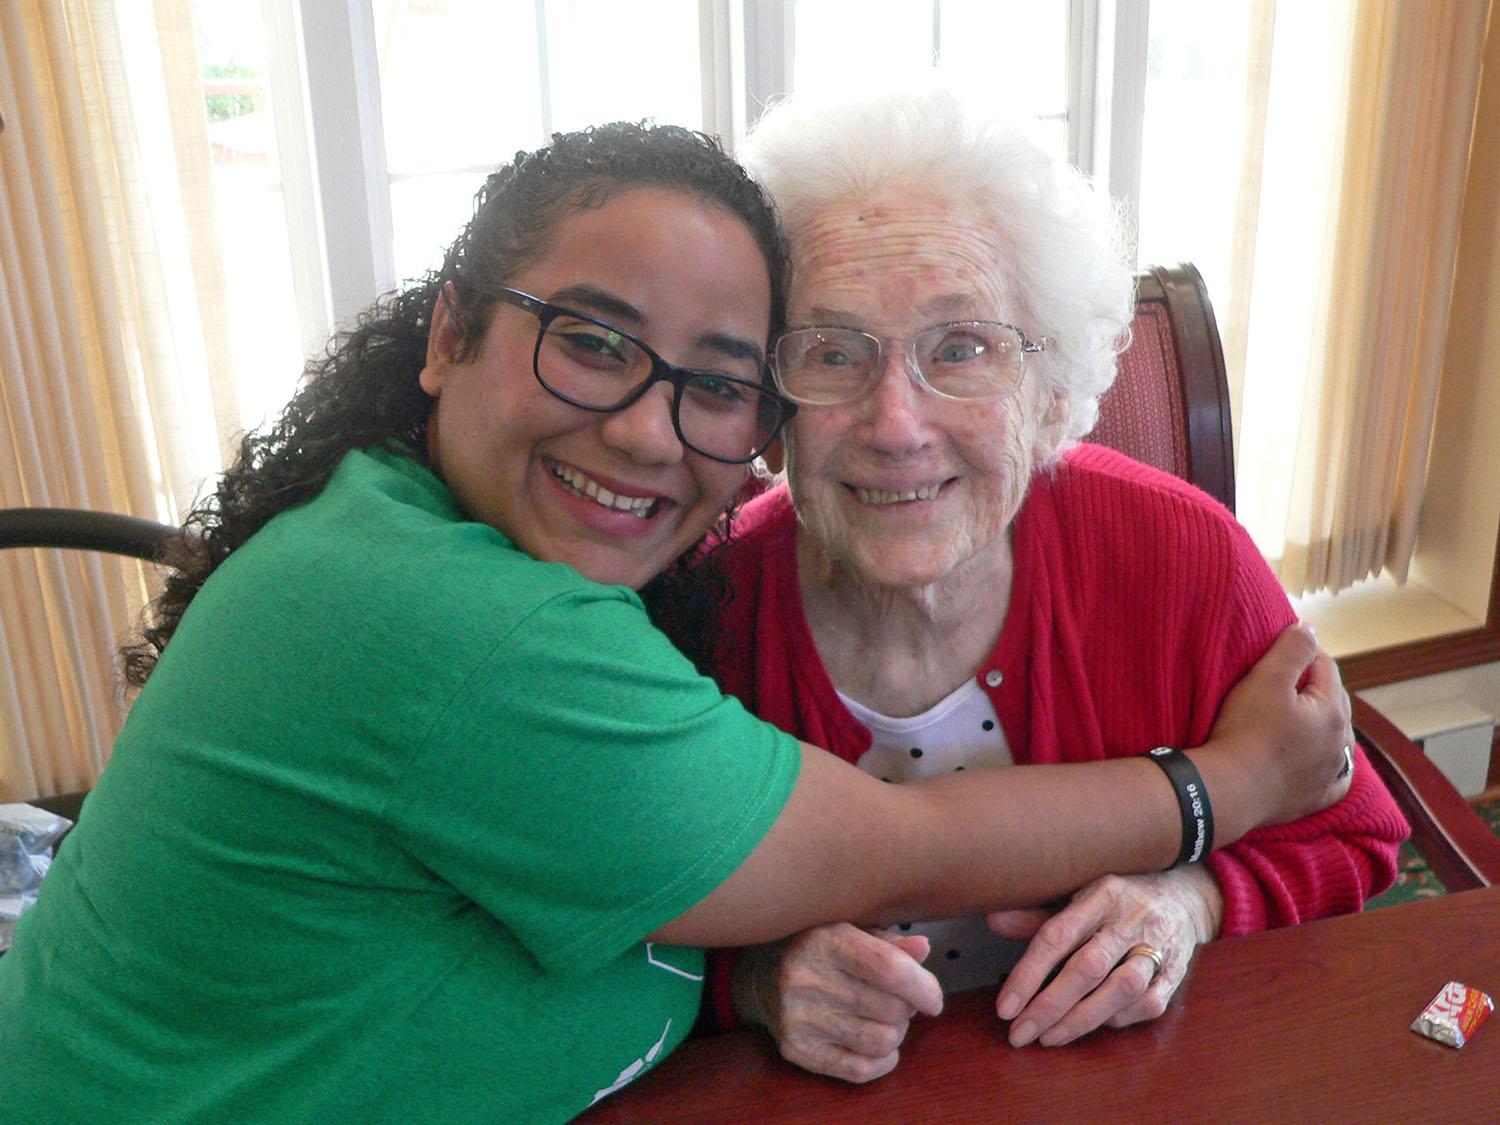 Oswego students doing English immersion program bonded with local Bishop's Commons seniors